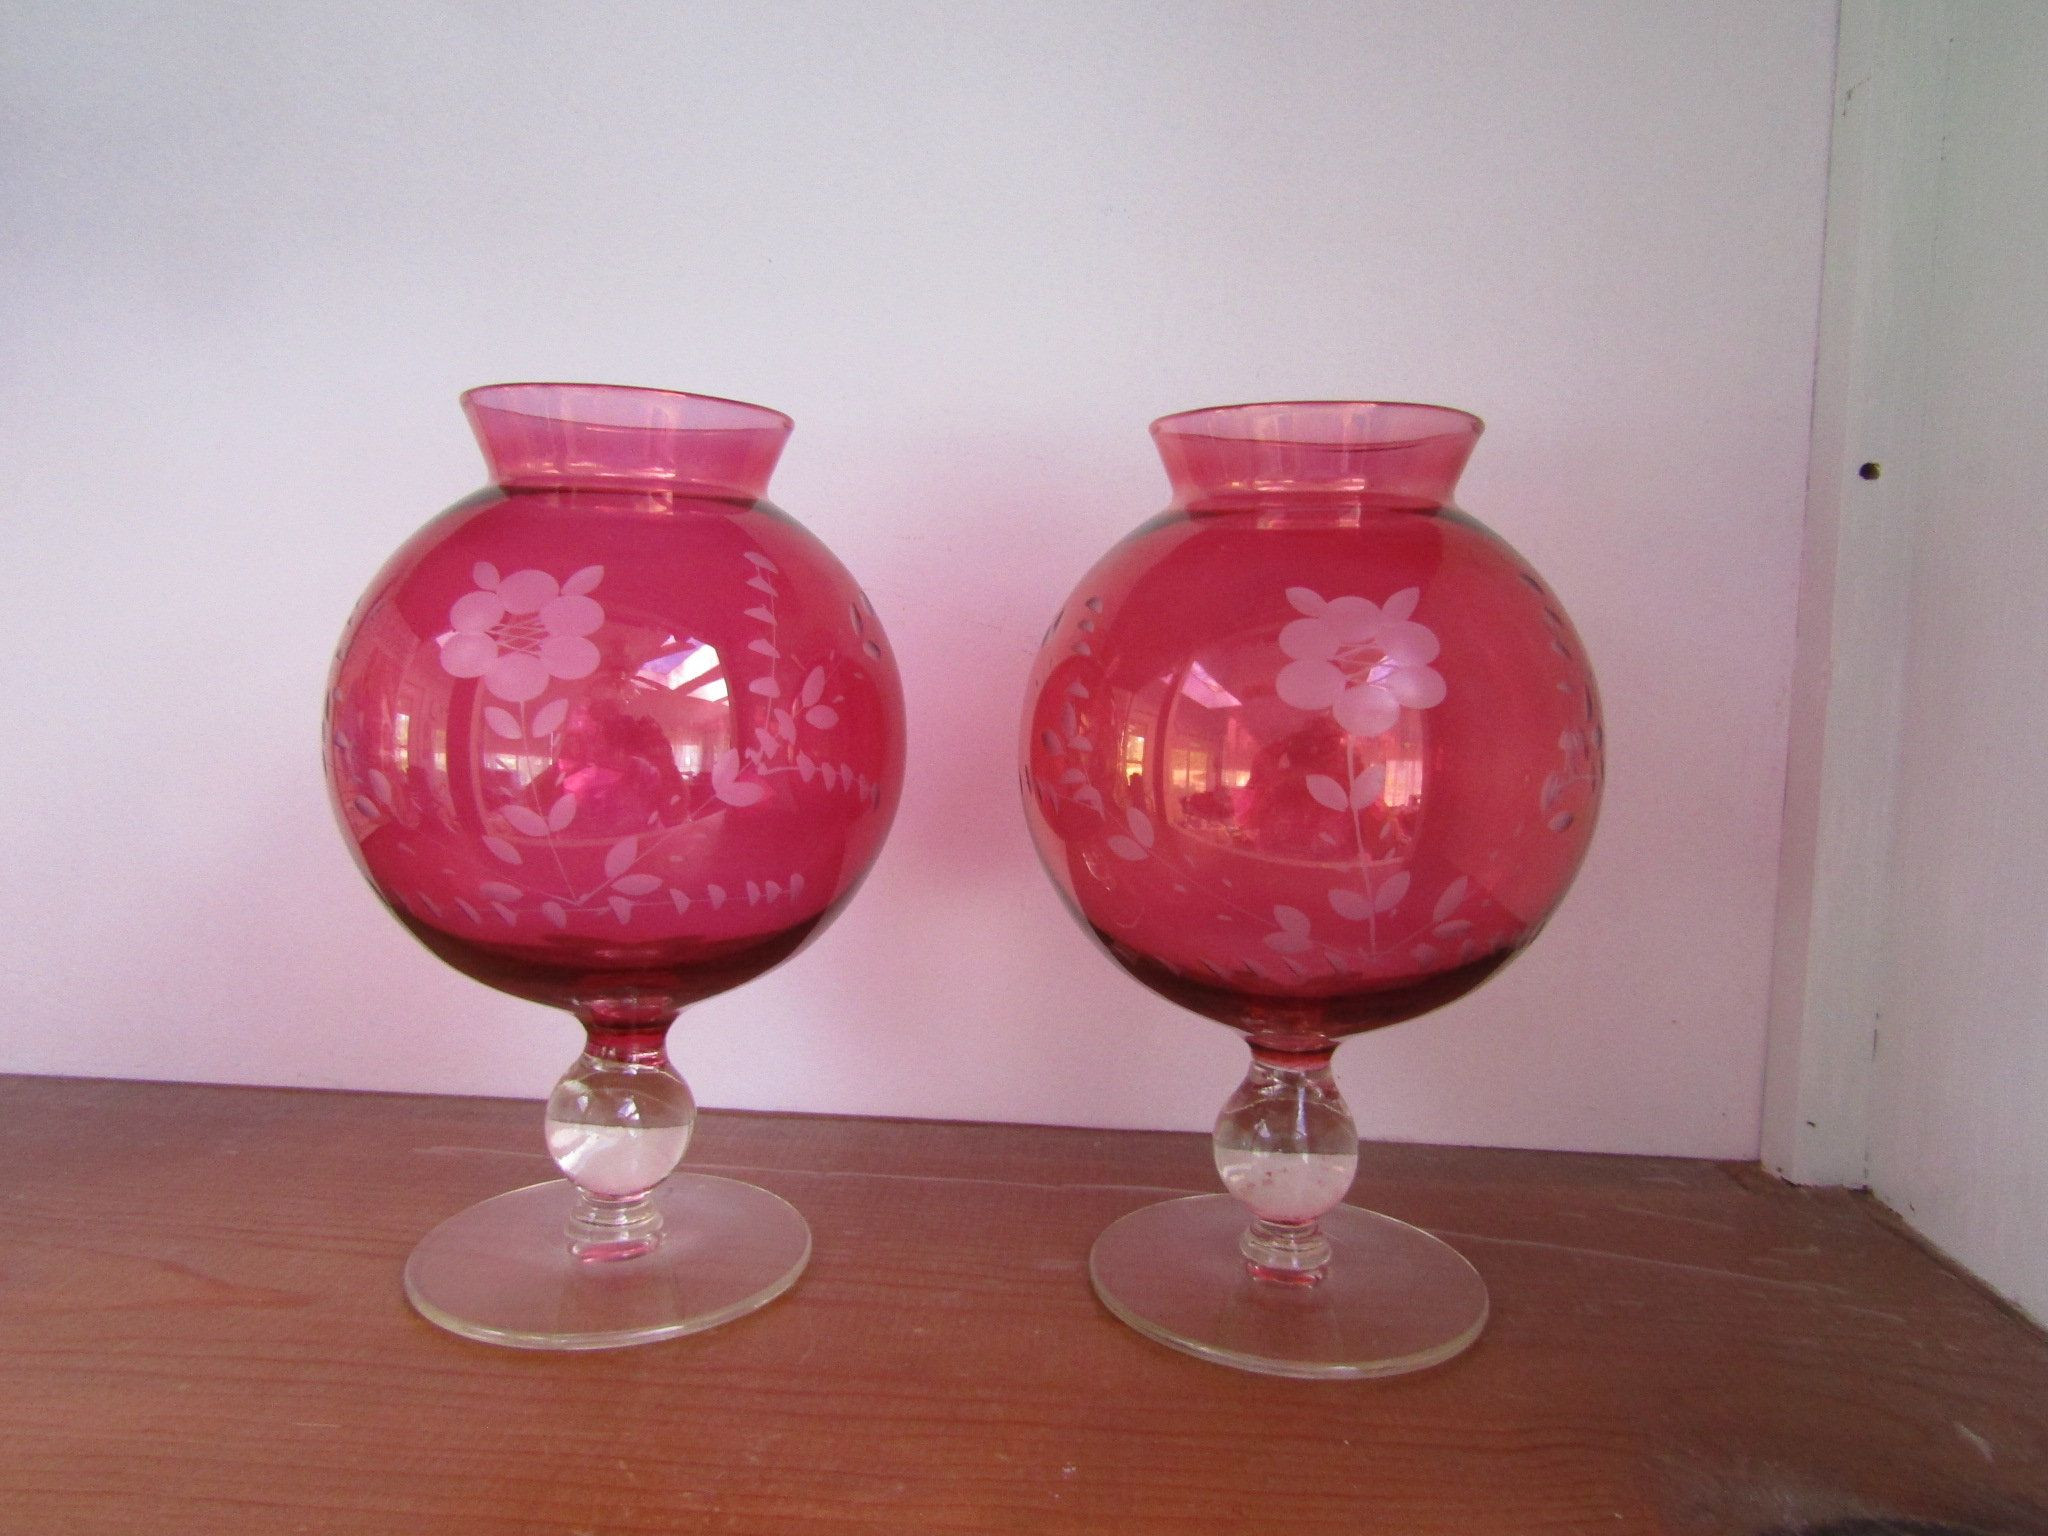 Mikasa Florale Vase Of Hello Fall Sale Cranberry Etched Glass Ball Vases Set Of 2 Floral Inside Cranberry Etched Glass Ball Vases Set Of 2 Floral Etching Vintage Items